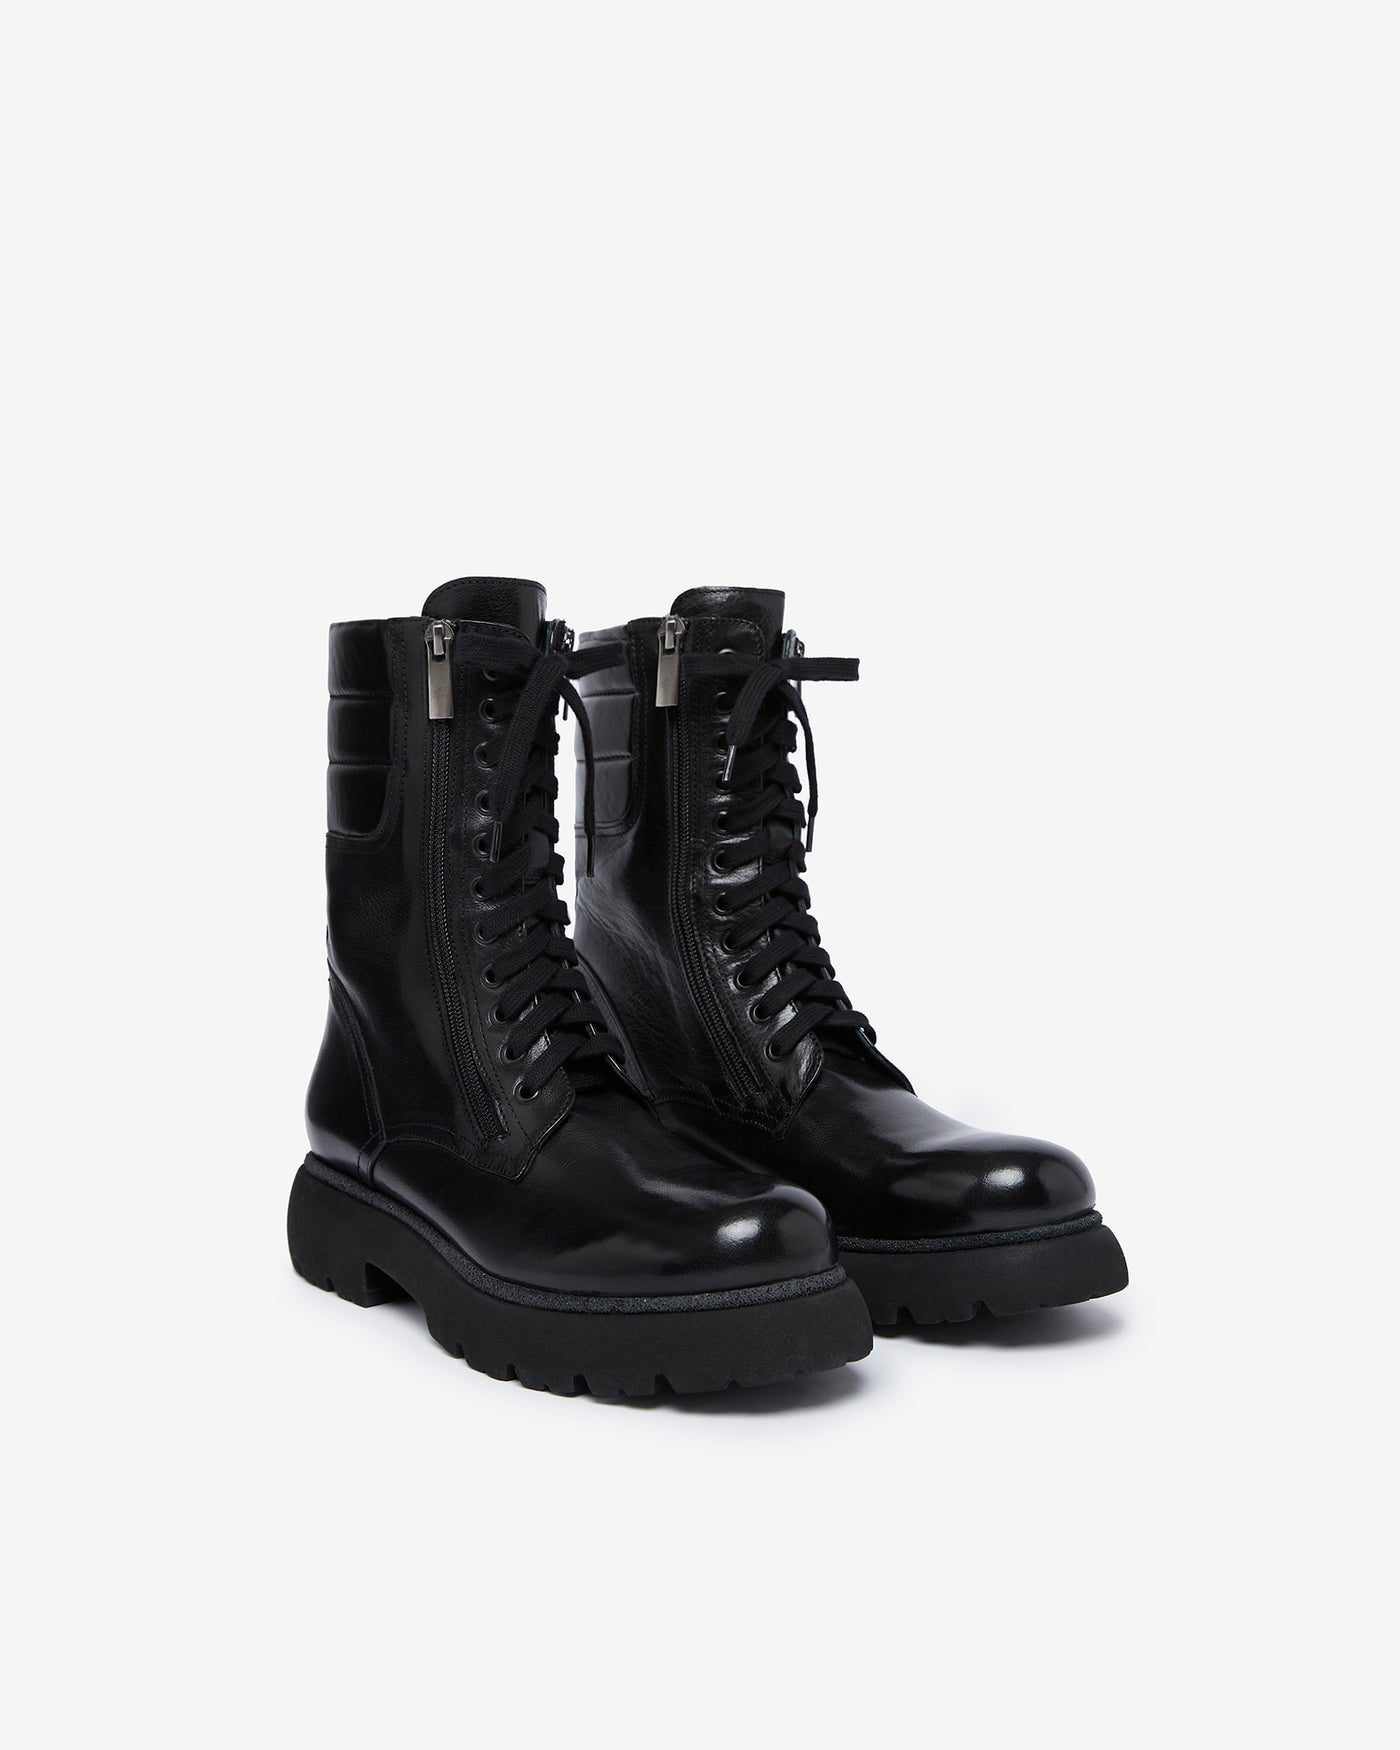 Black High-Laced Boots